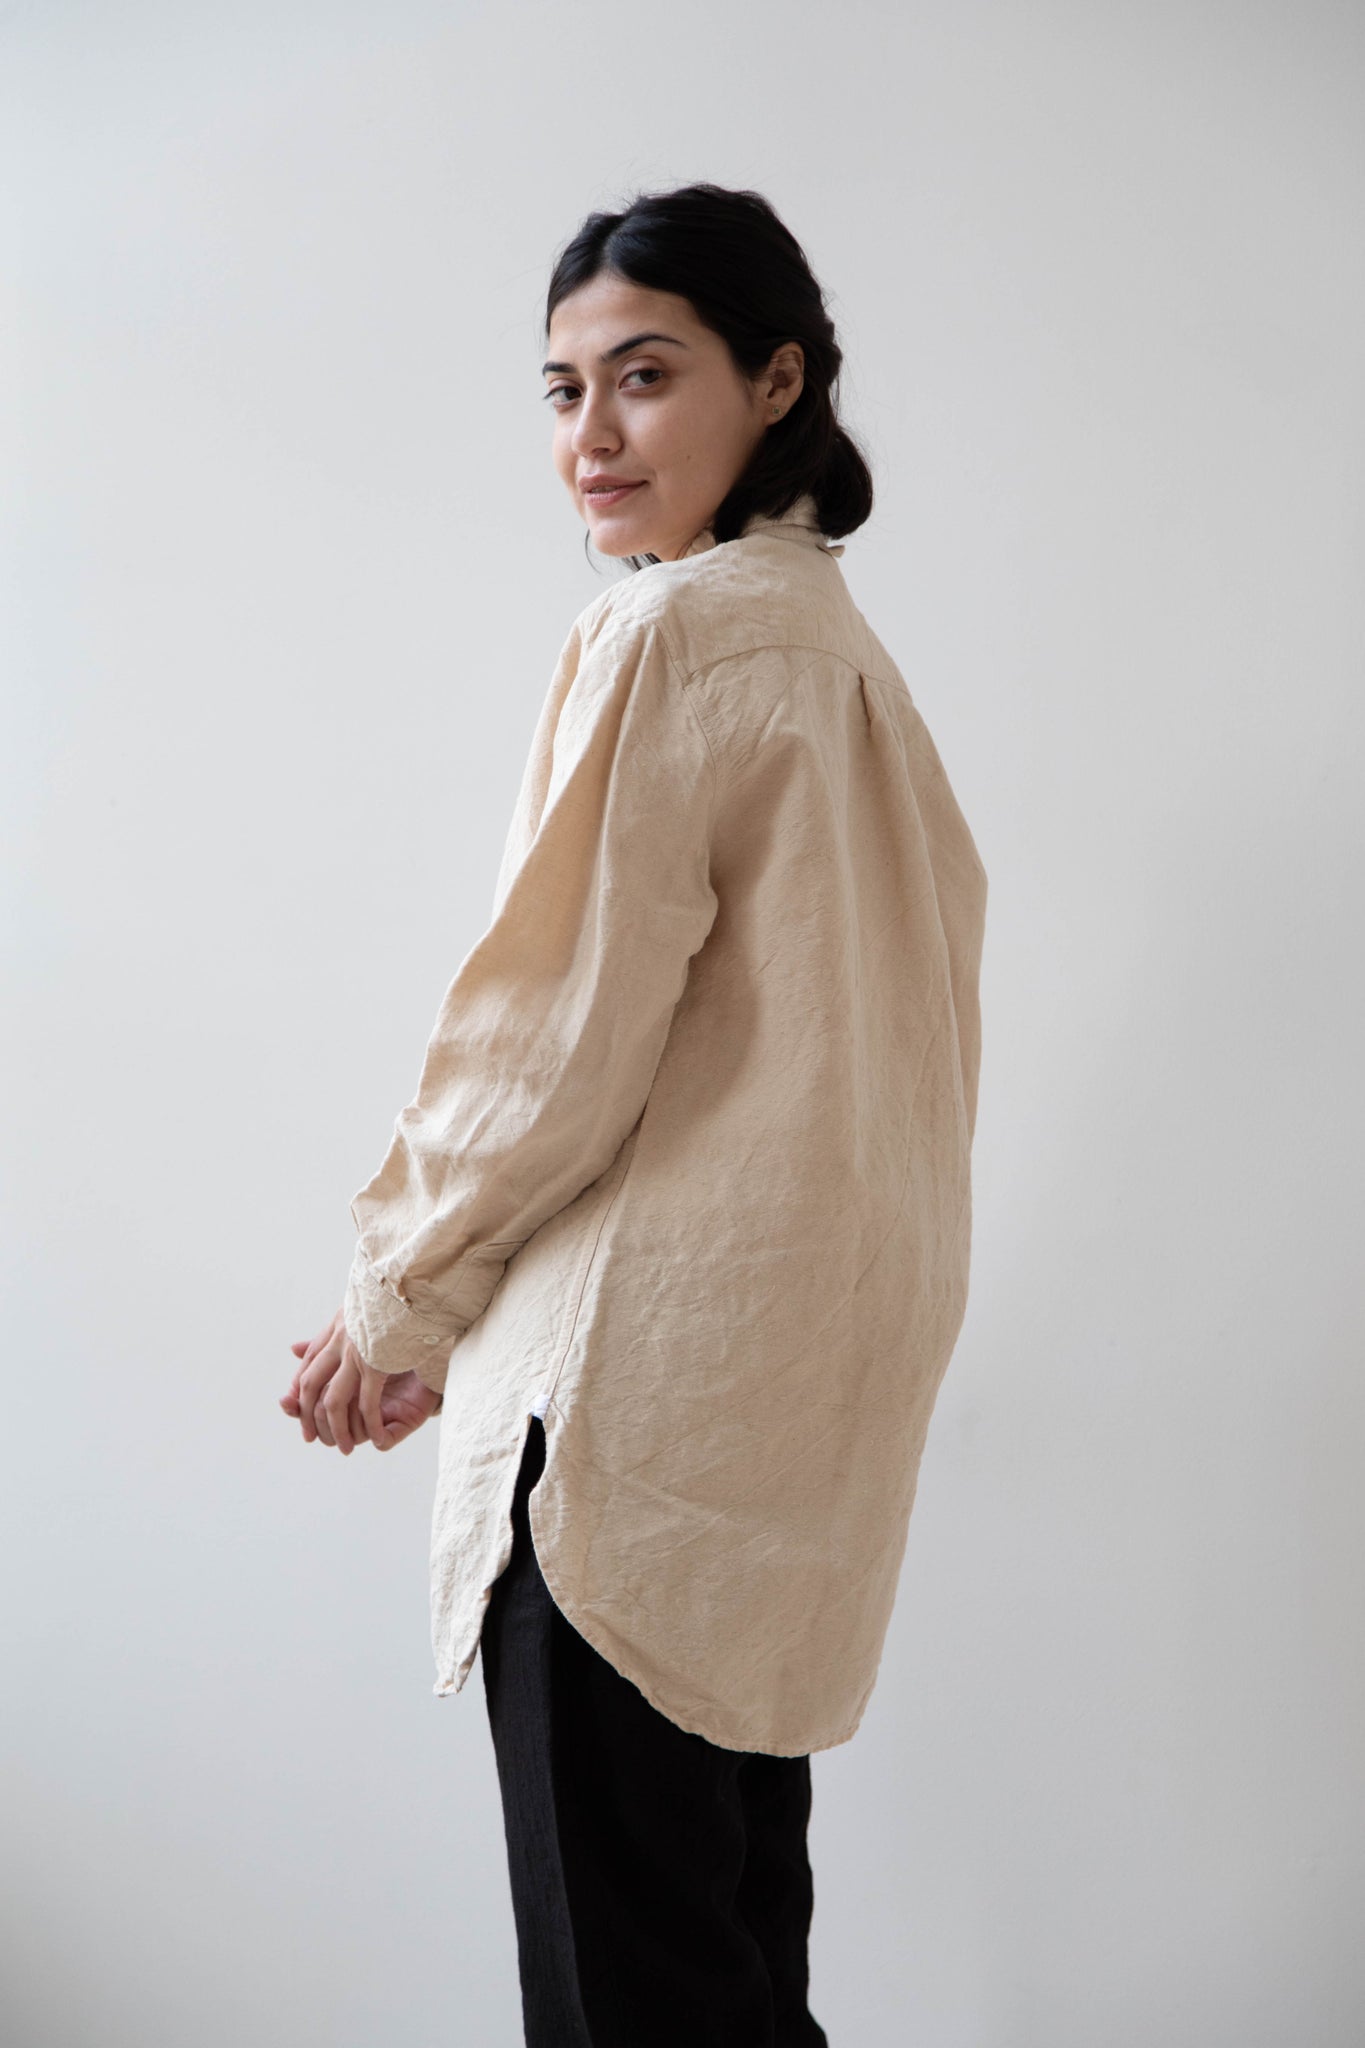 Oliver Church | Scalloped Shirt in Natural Antique Linen